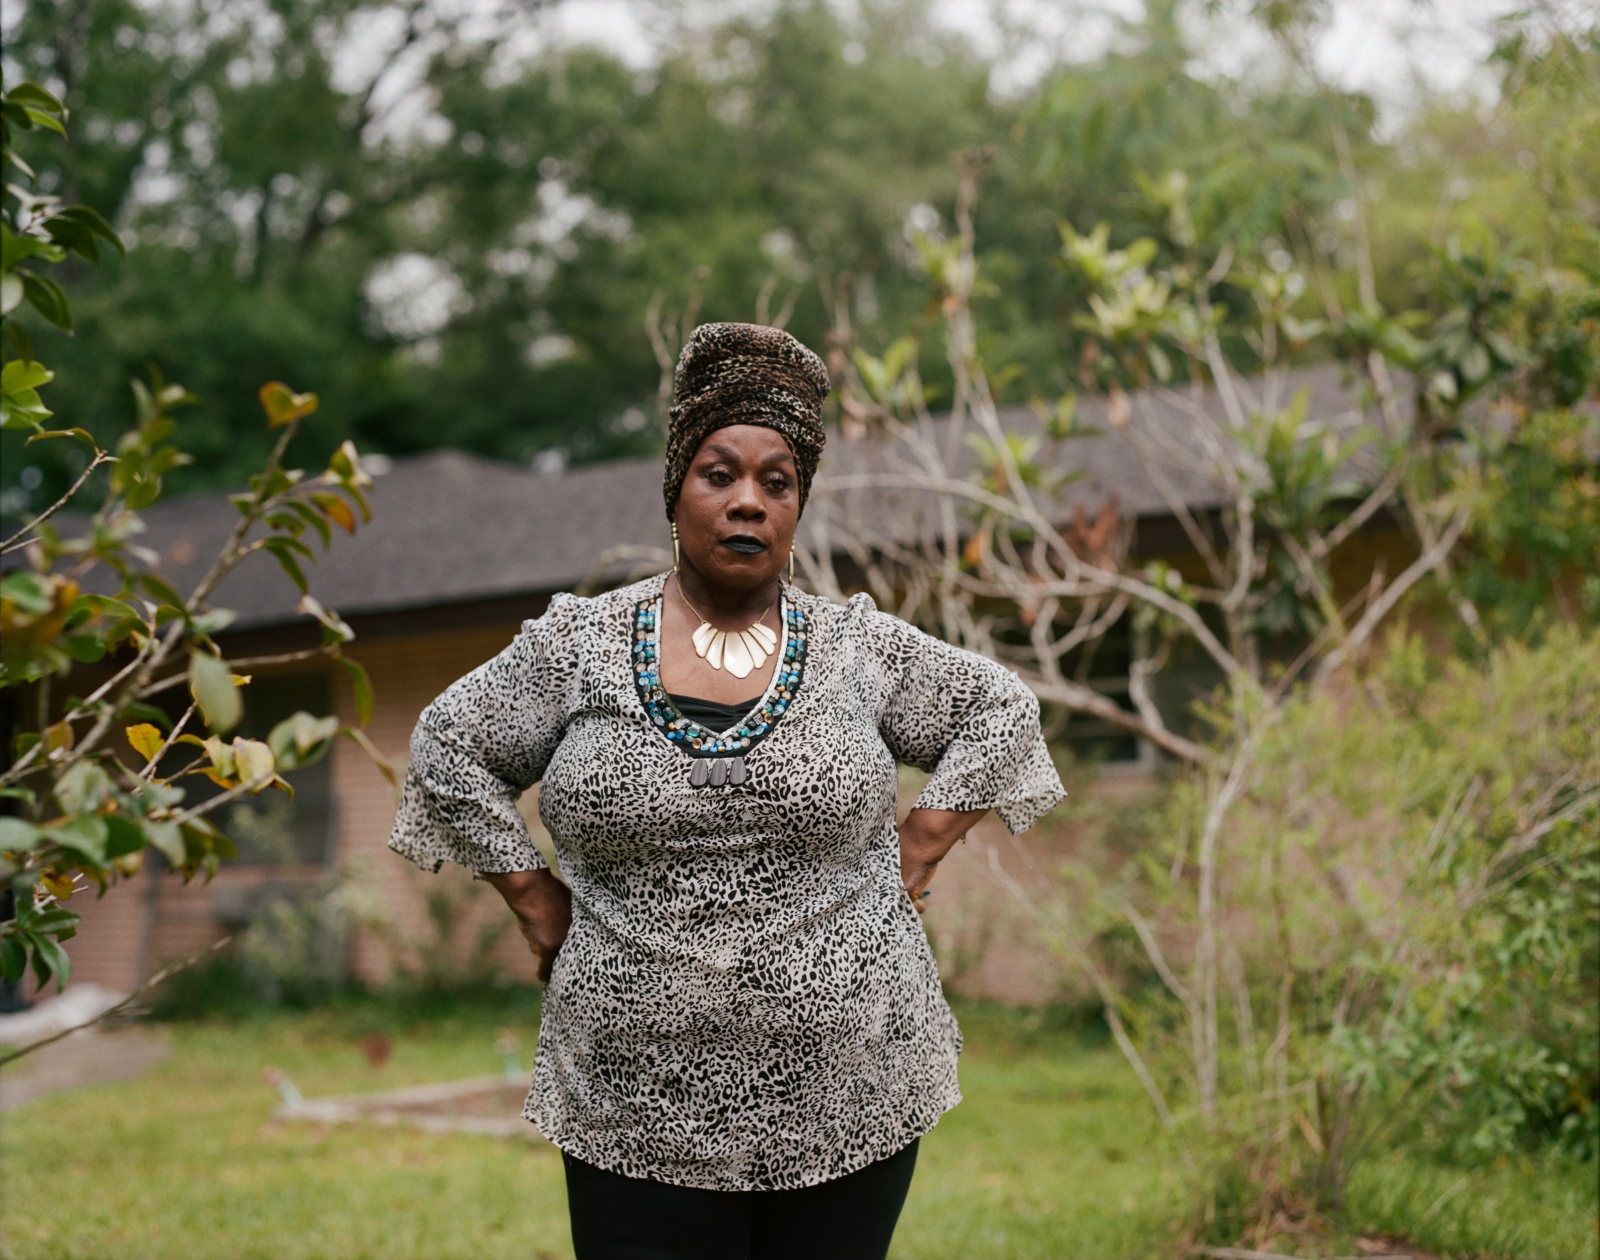 A woman with a large necklace and head wrap stands with her hands on her hips in front of a house.